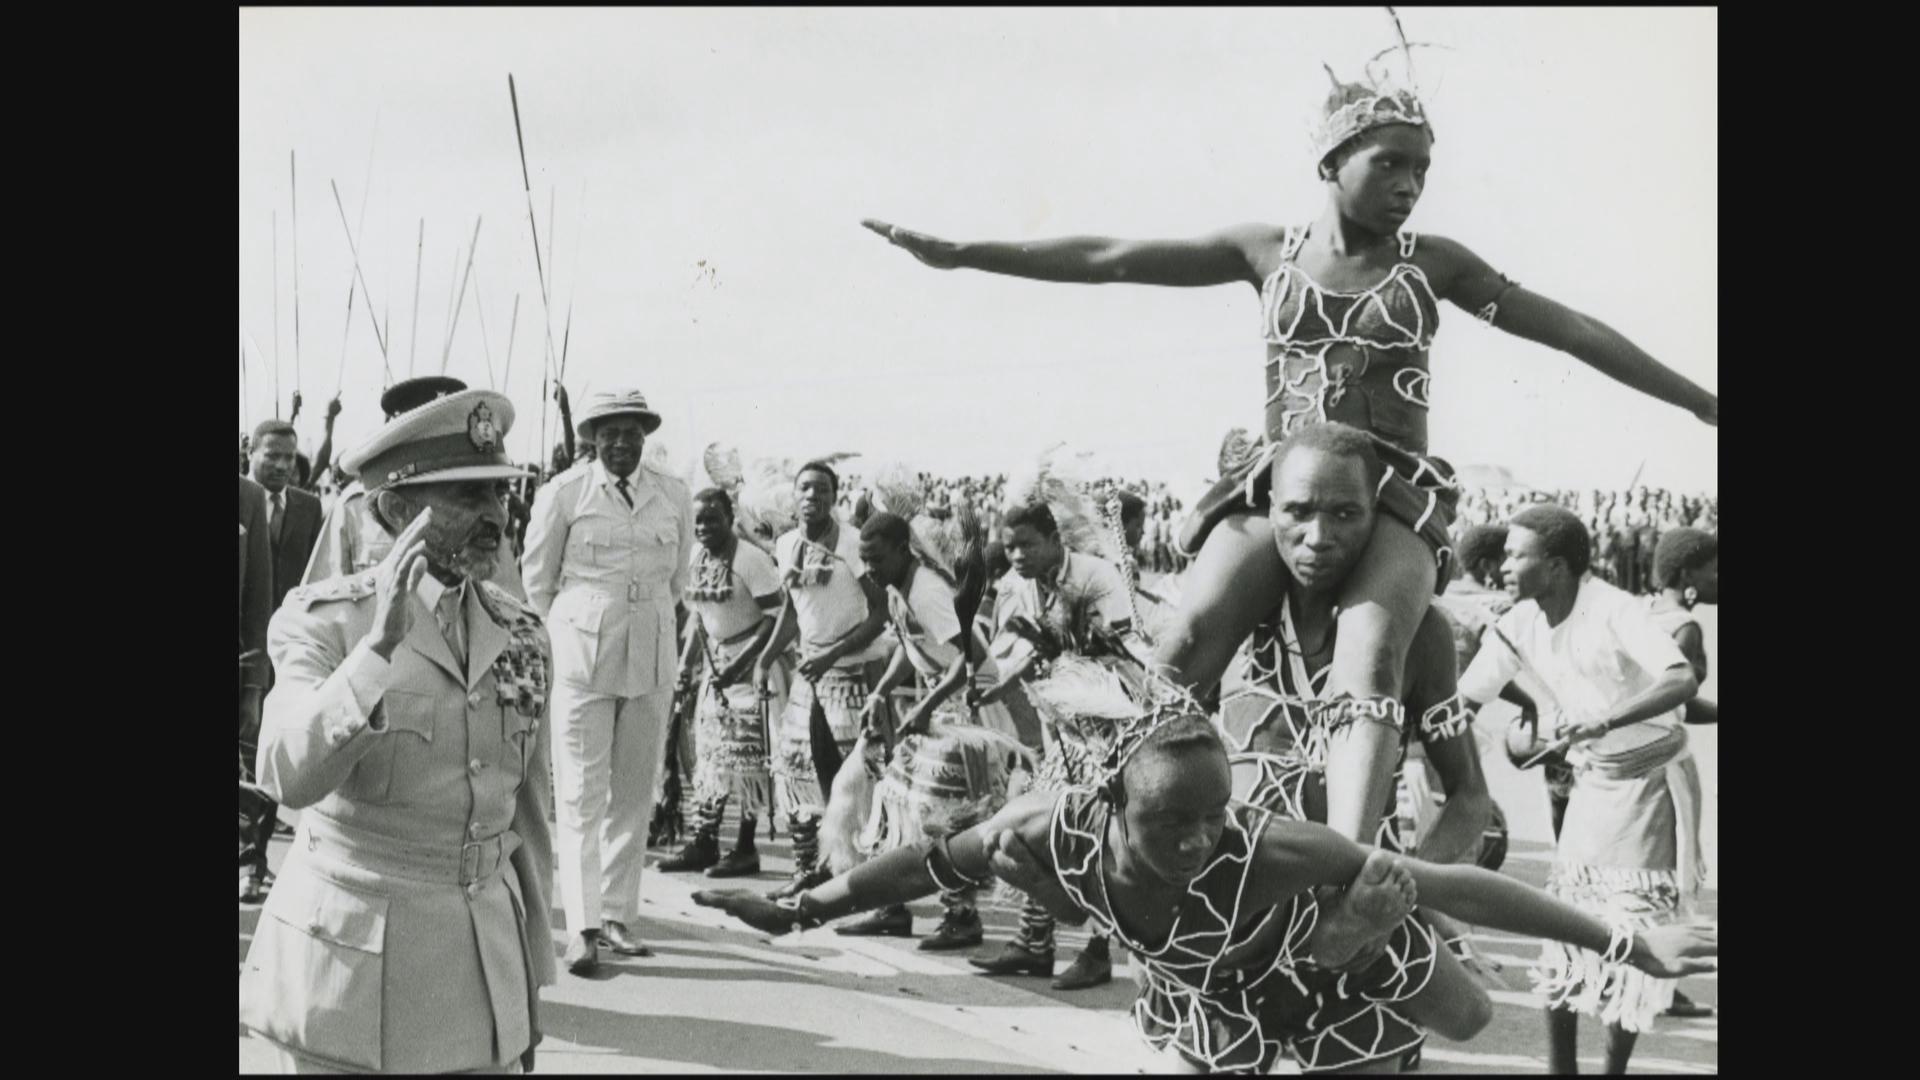 Emperor Haile Selassie salutes the entertainers.